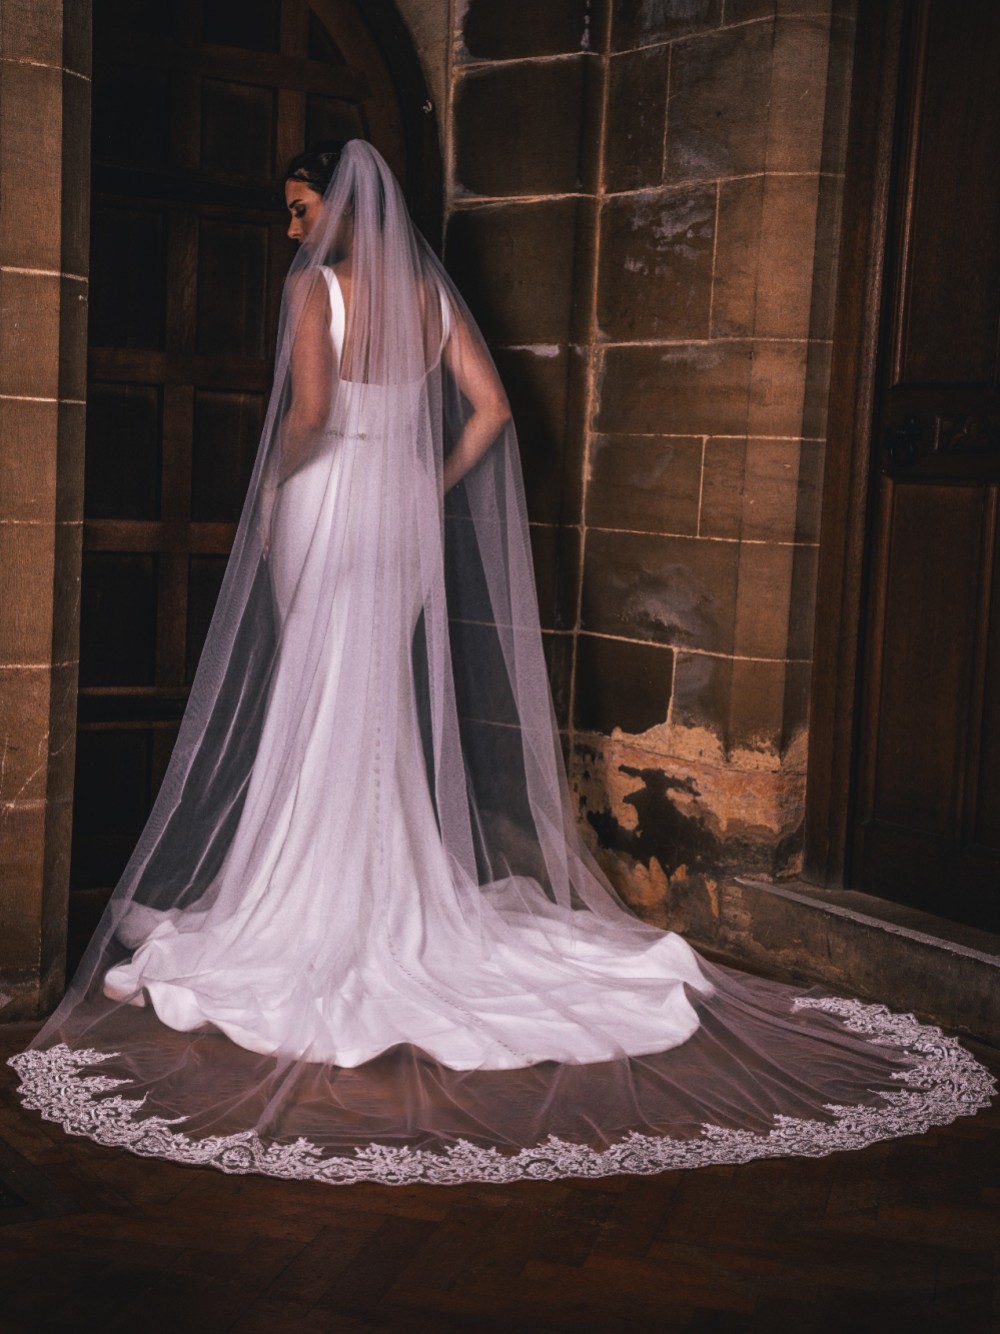 Photograph: Perfect Bridal Ivory Single Tier Corded Lace Edge Veil